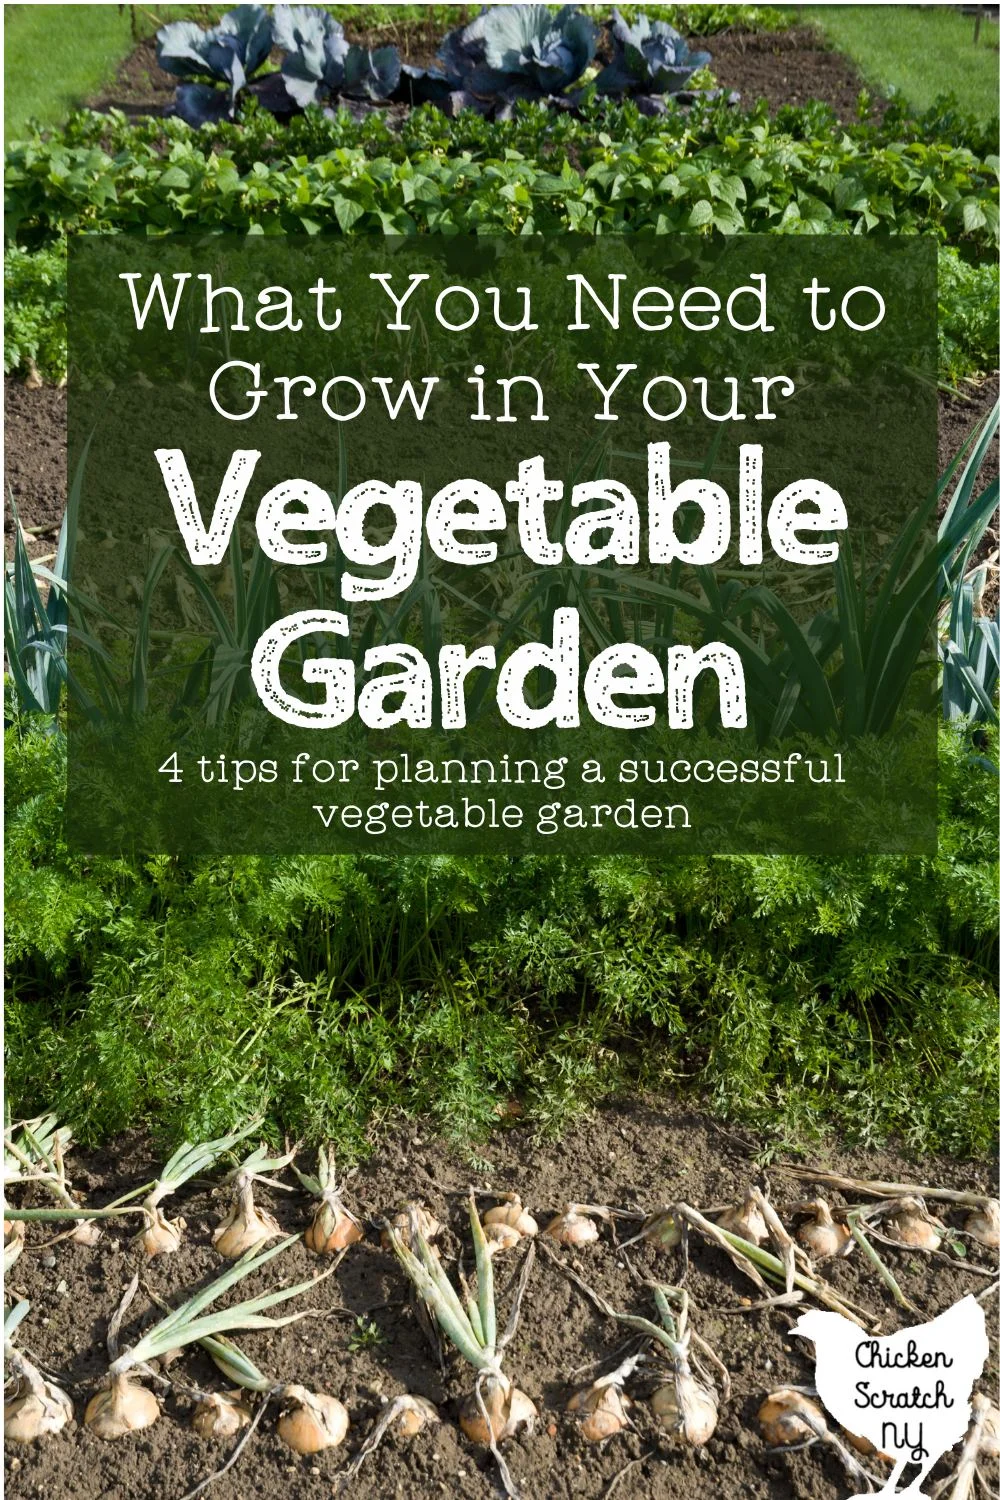 wide view of a vegetable garden showing several rows of crops with text overlay: what you need to grow in your vegetable garden - 4 tips for a successful garden without getting overwhelmed